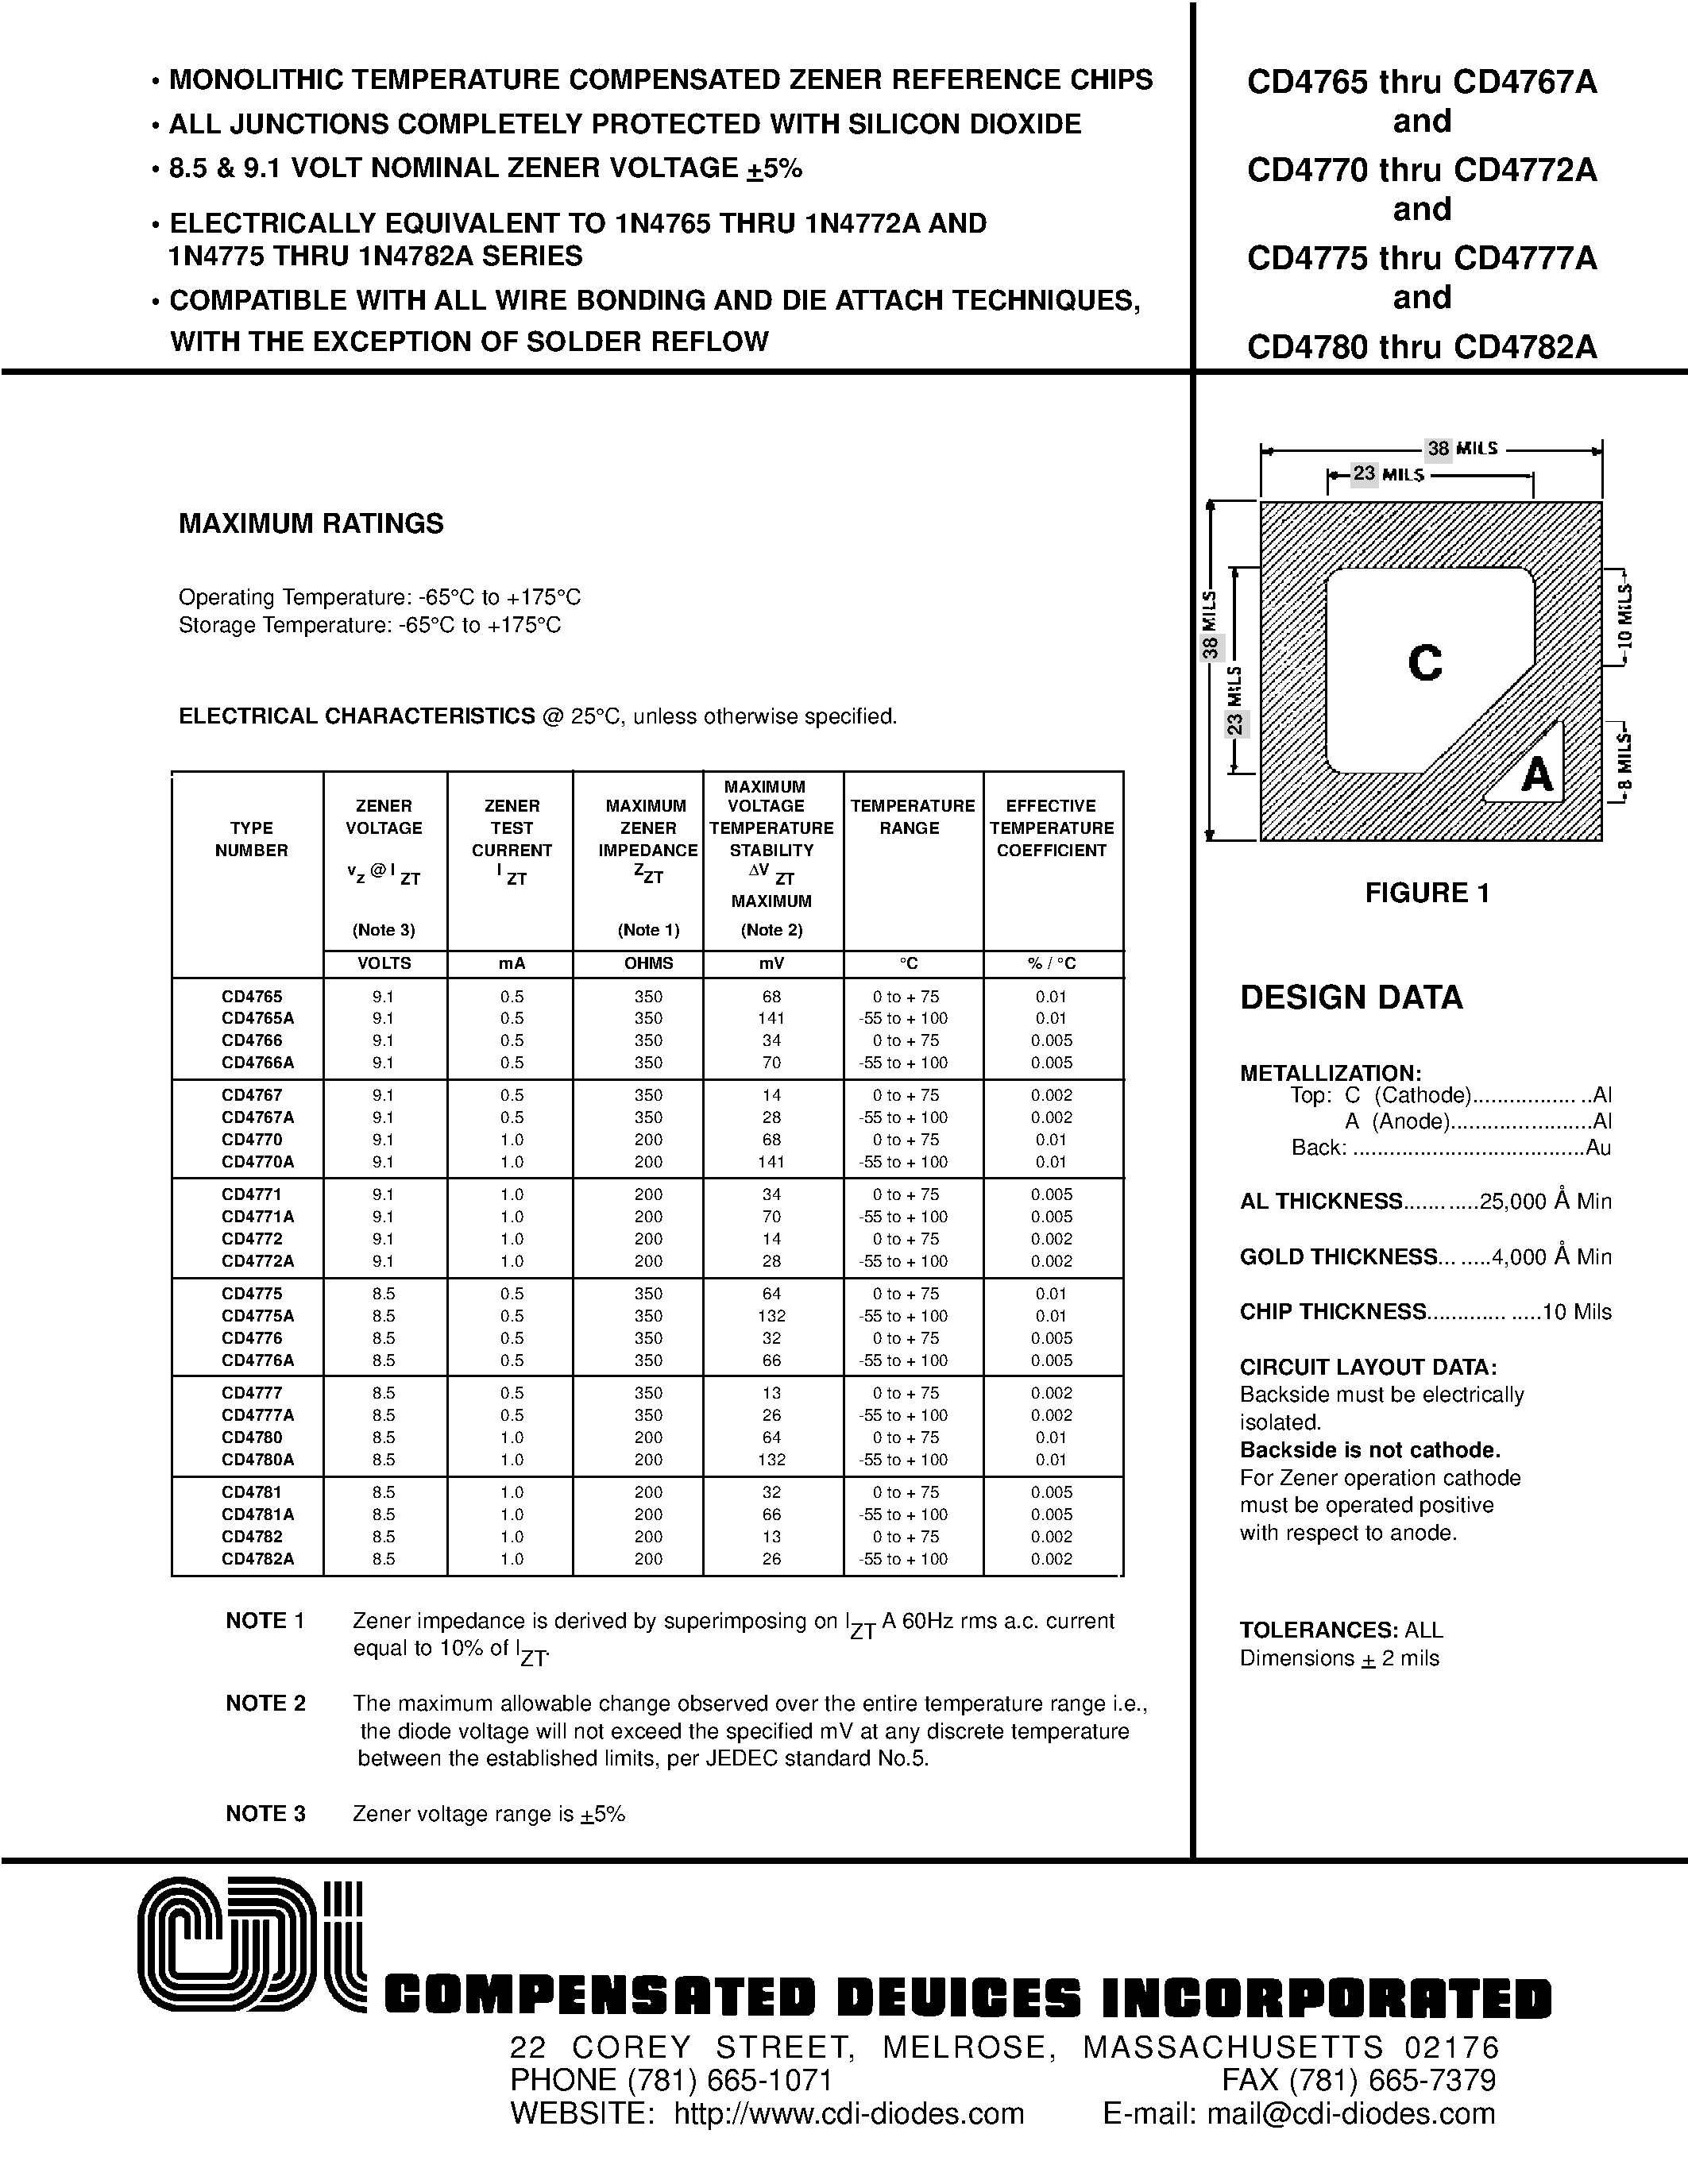 Datasheet CD4777A - MONOLITHIC TEMPERATURE COMPENSATED ZENER REFERENCE CHIPS page 1